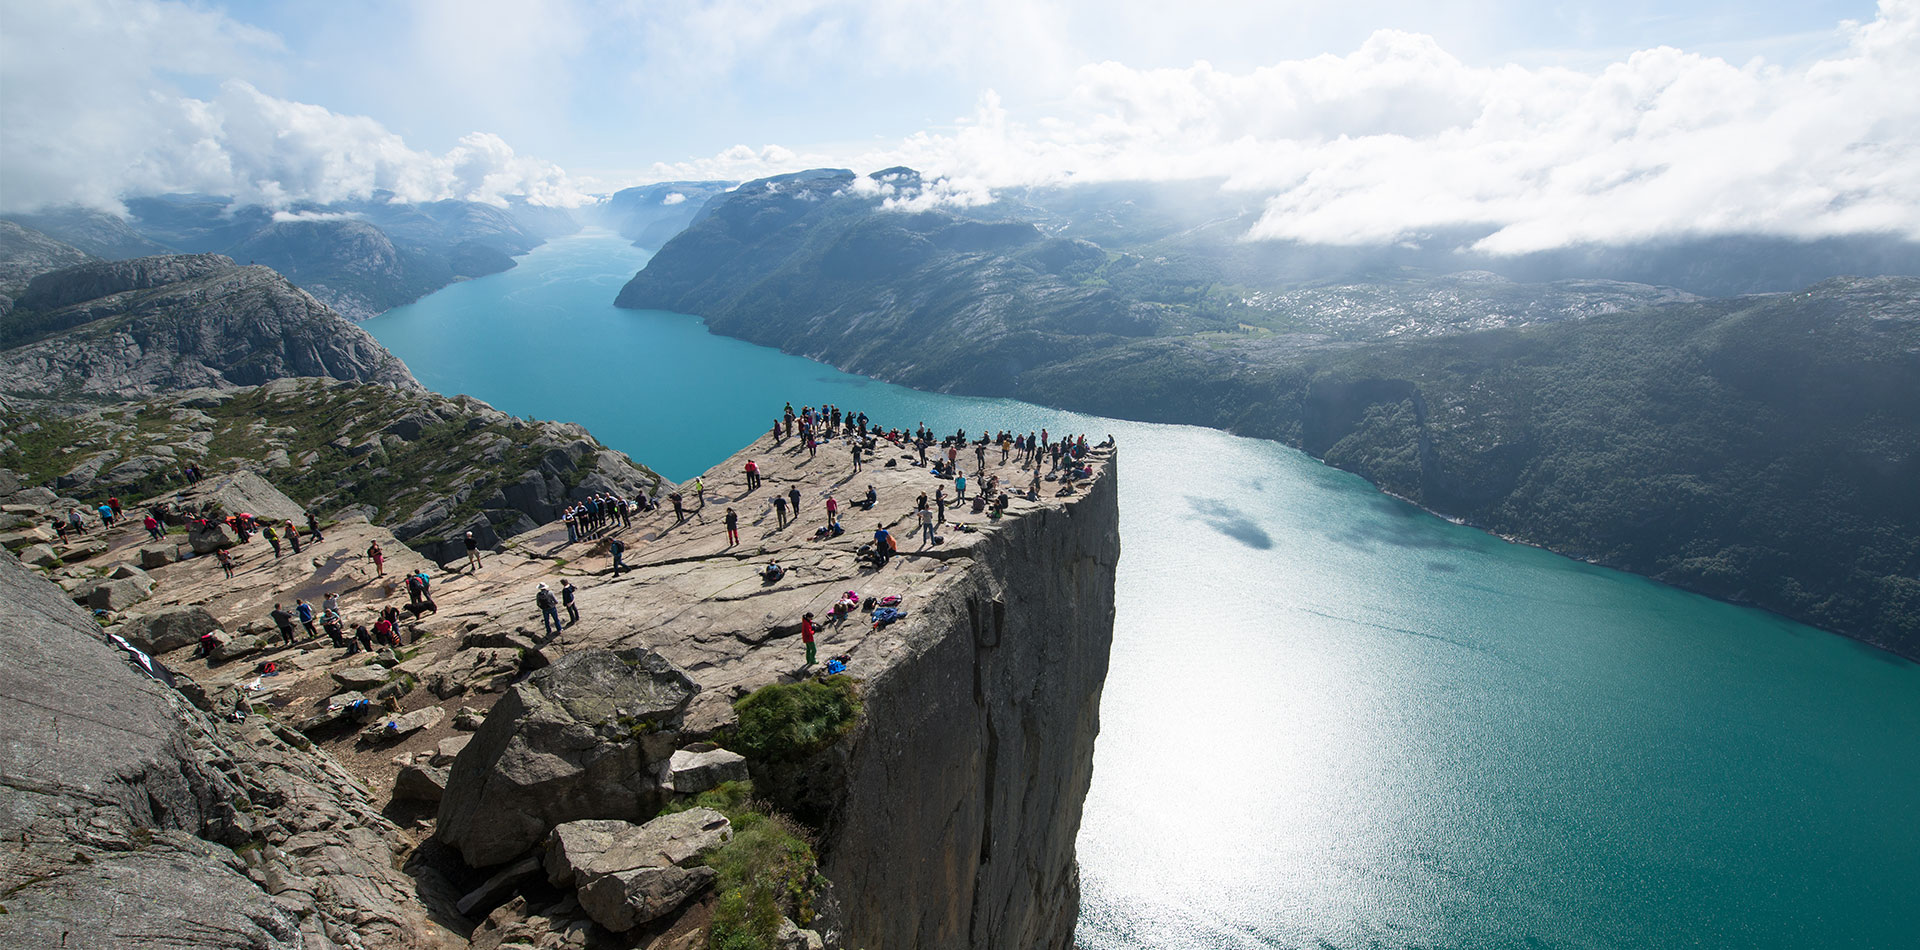 View of Lysefjord and the Cliff Preikestolen, Norway